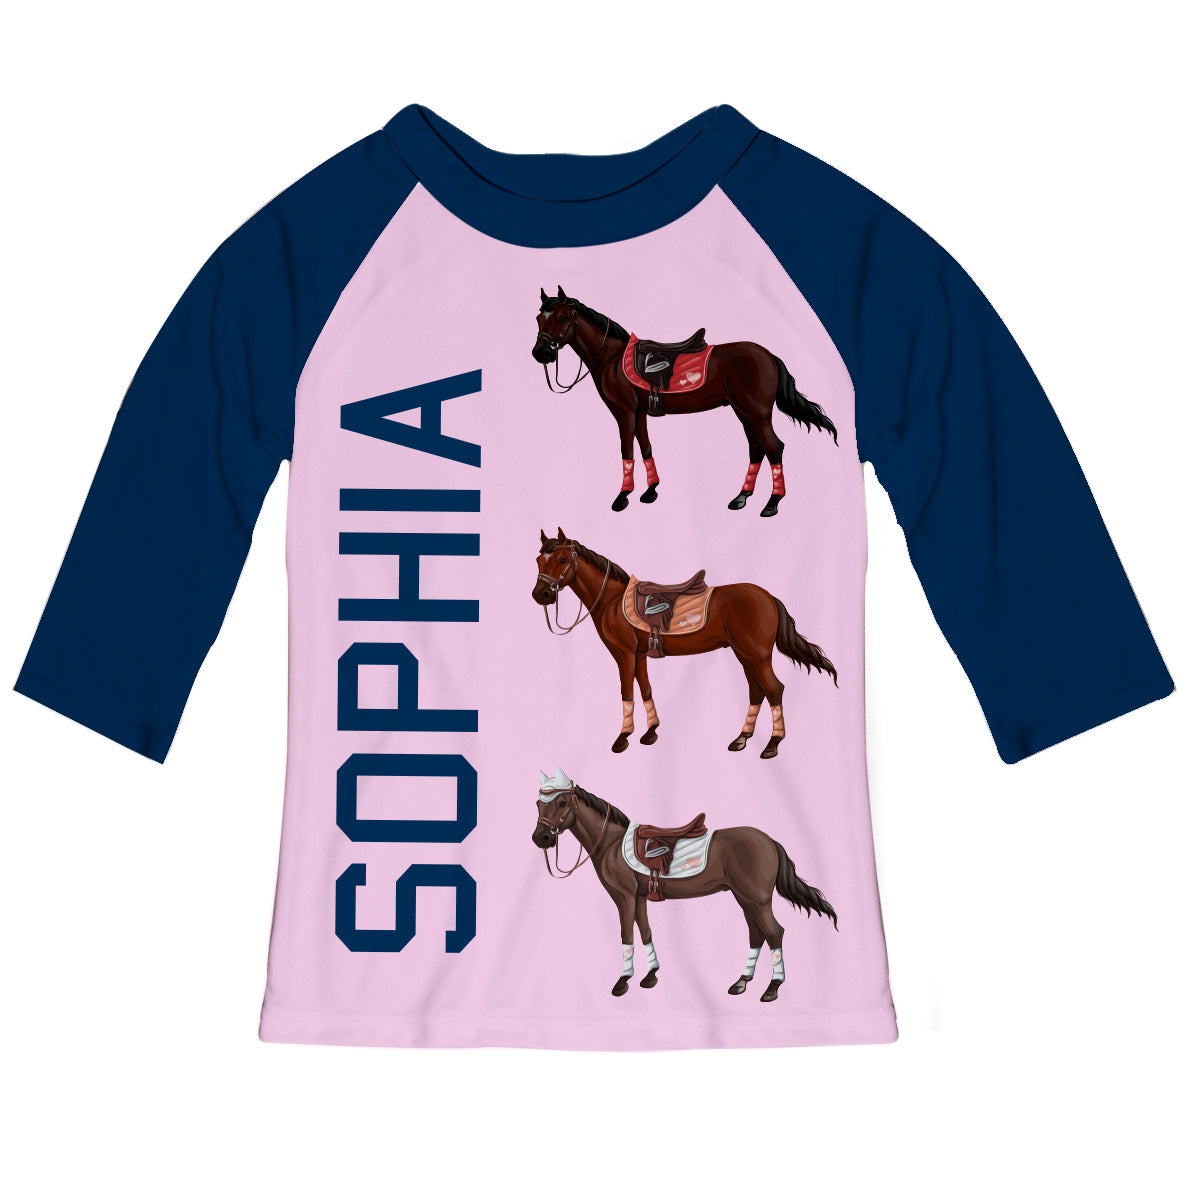 Light pink and navy sleeves blouse with horses and name - Wimziy&Co.